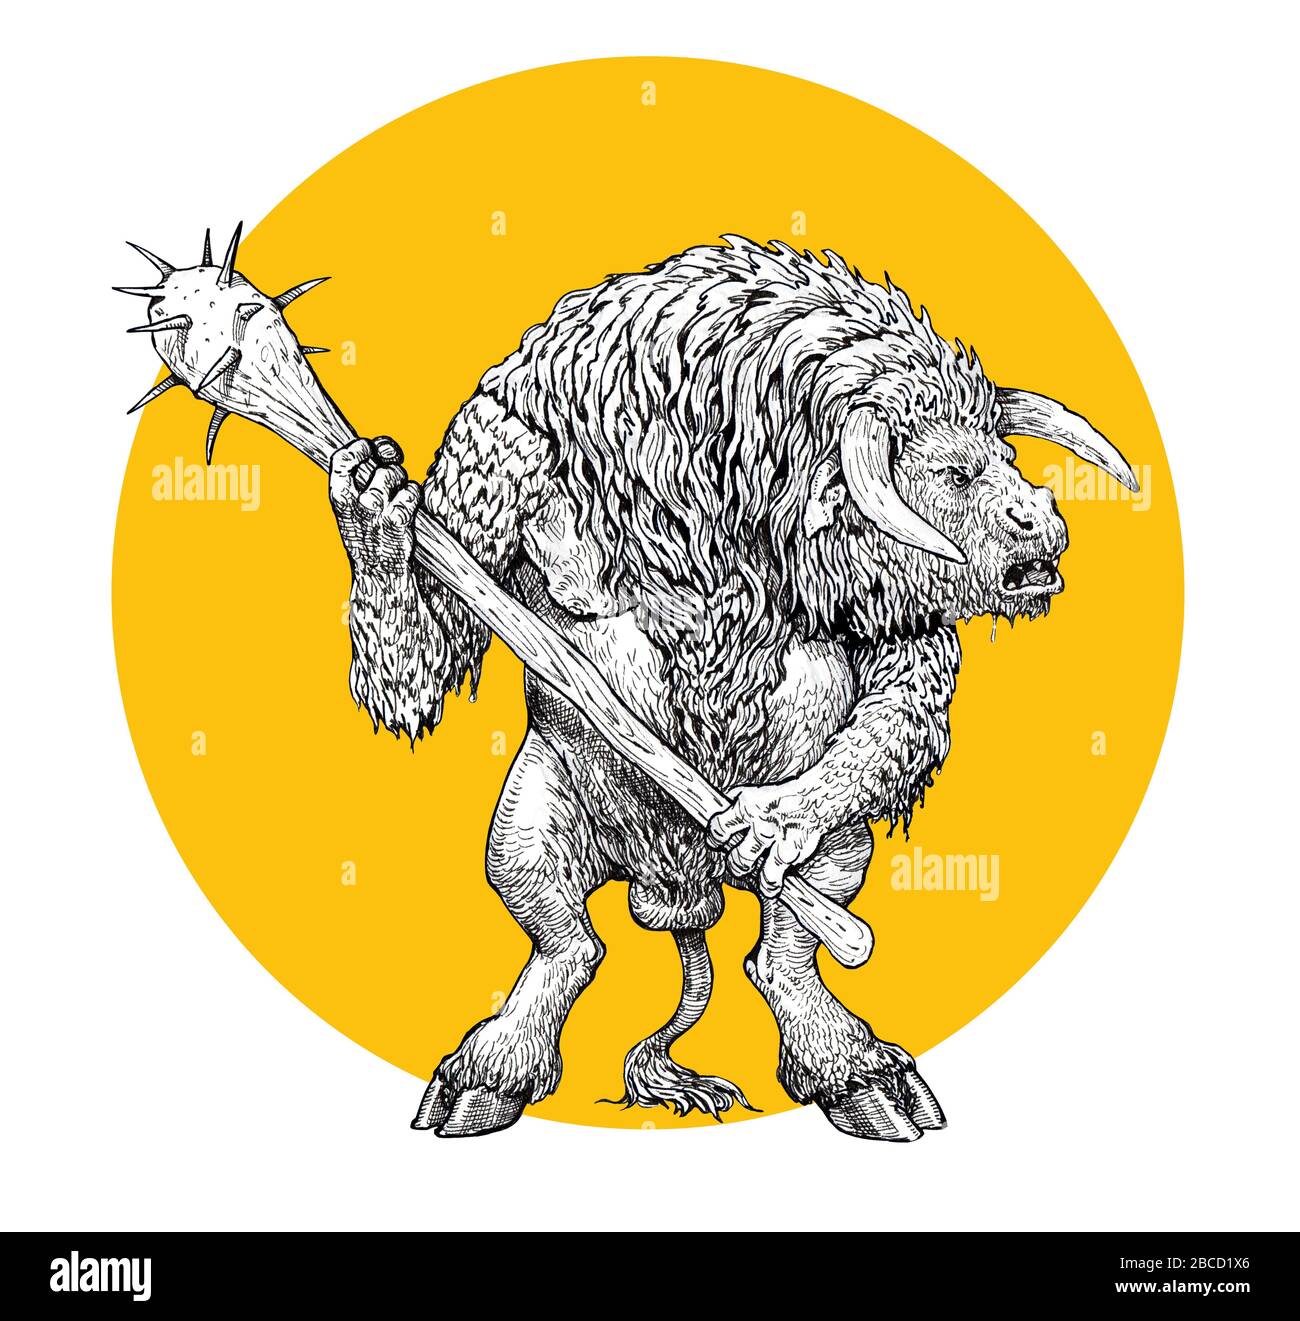 Monster illustration. Minotaur anatomy. Mythical creature from Greek myths. Fantasy drawing. Stock Photo